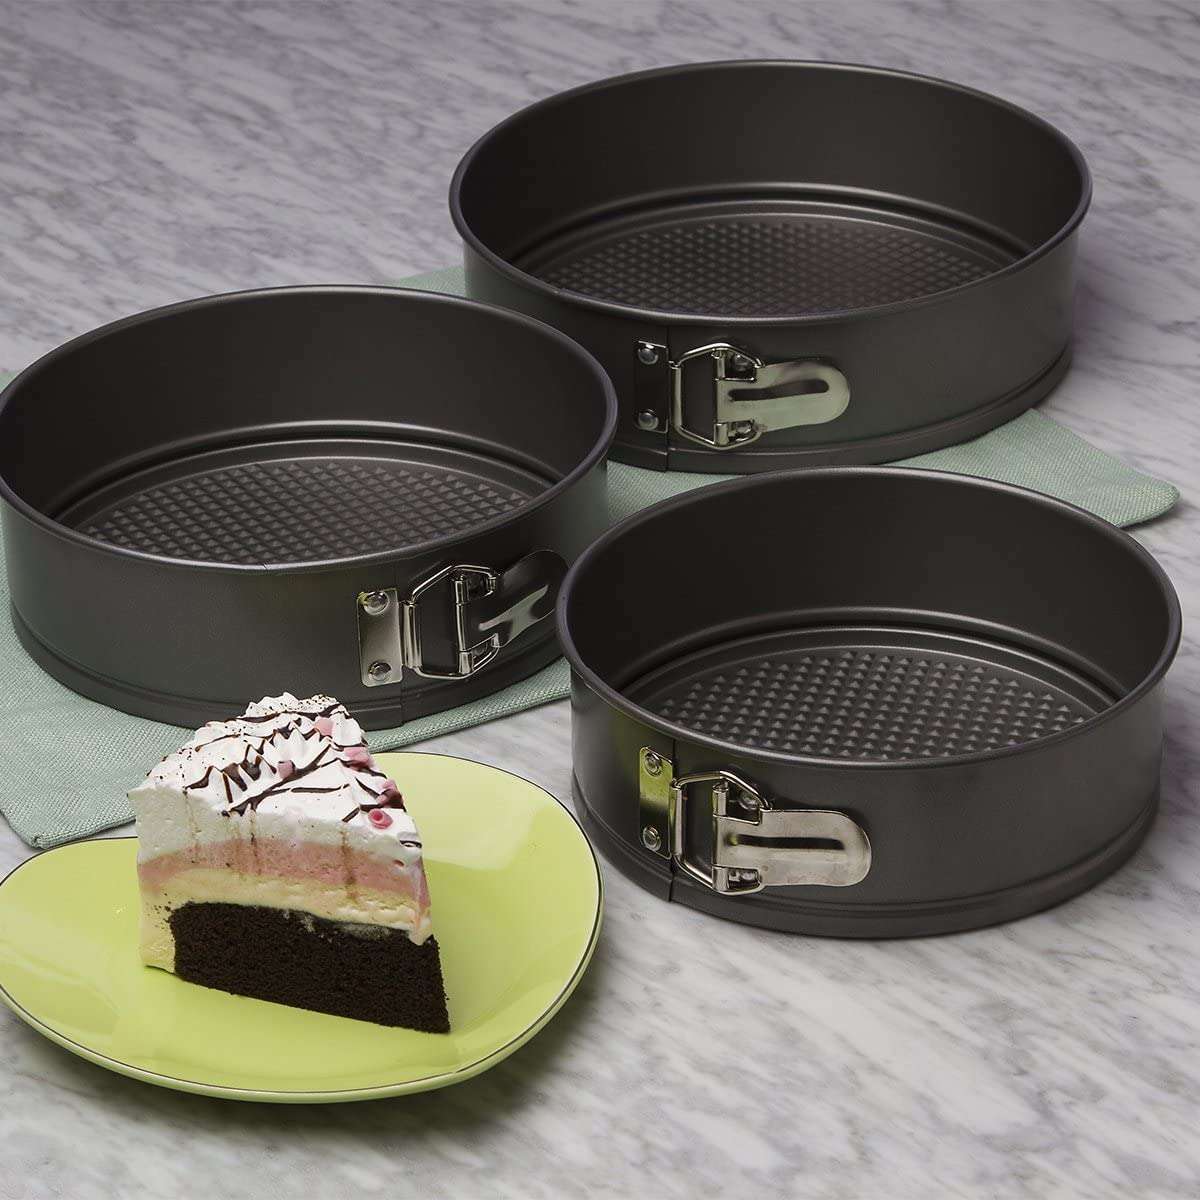 Rowoco Spring form Baking Pans Set of 2, 9 In and 10 In